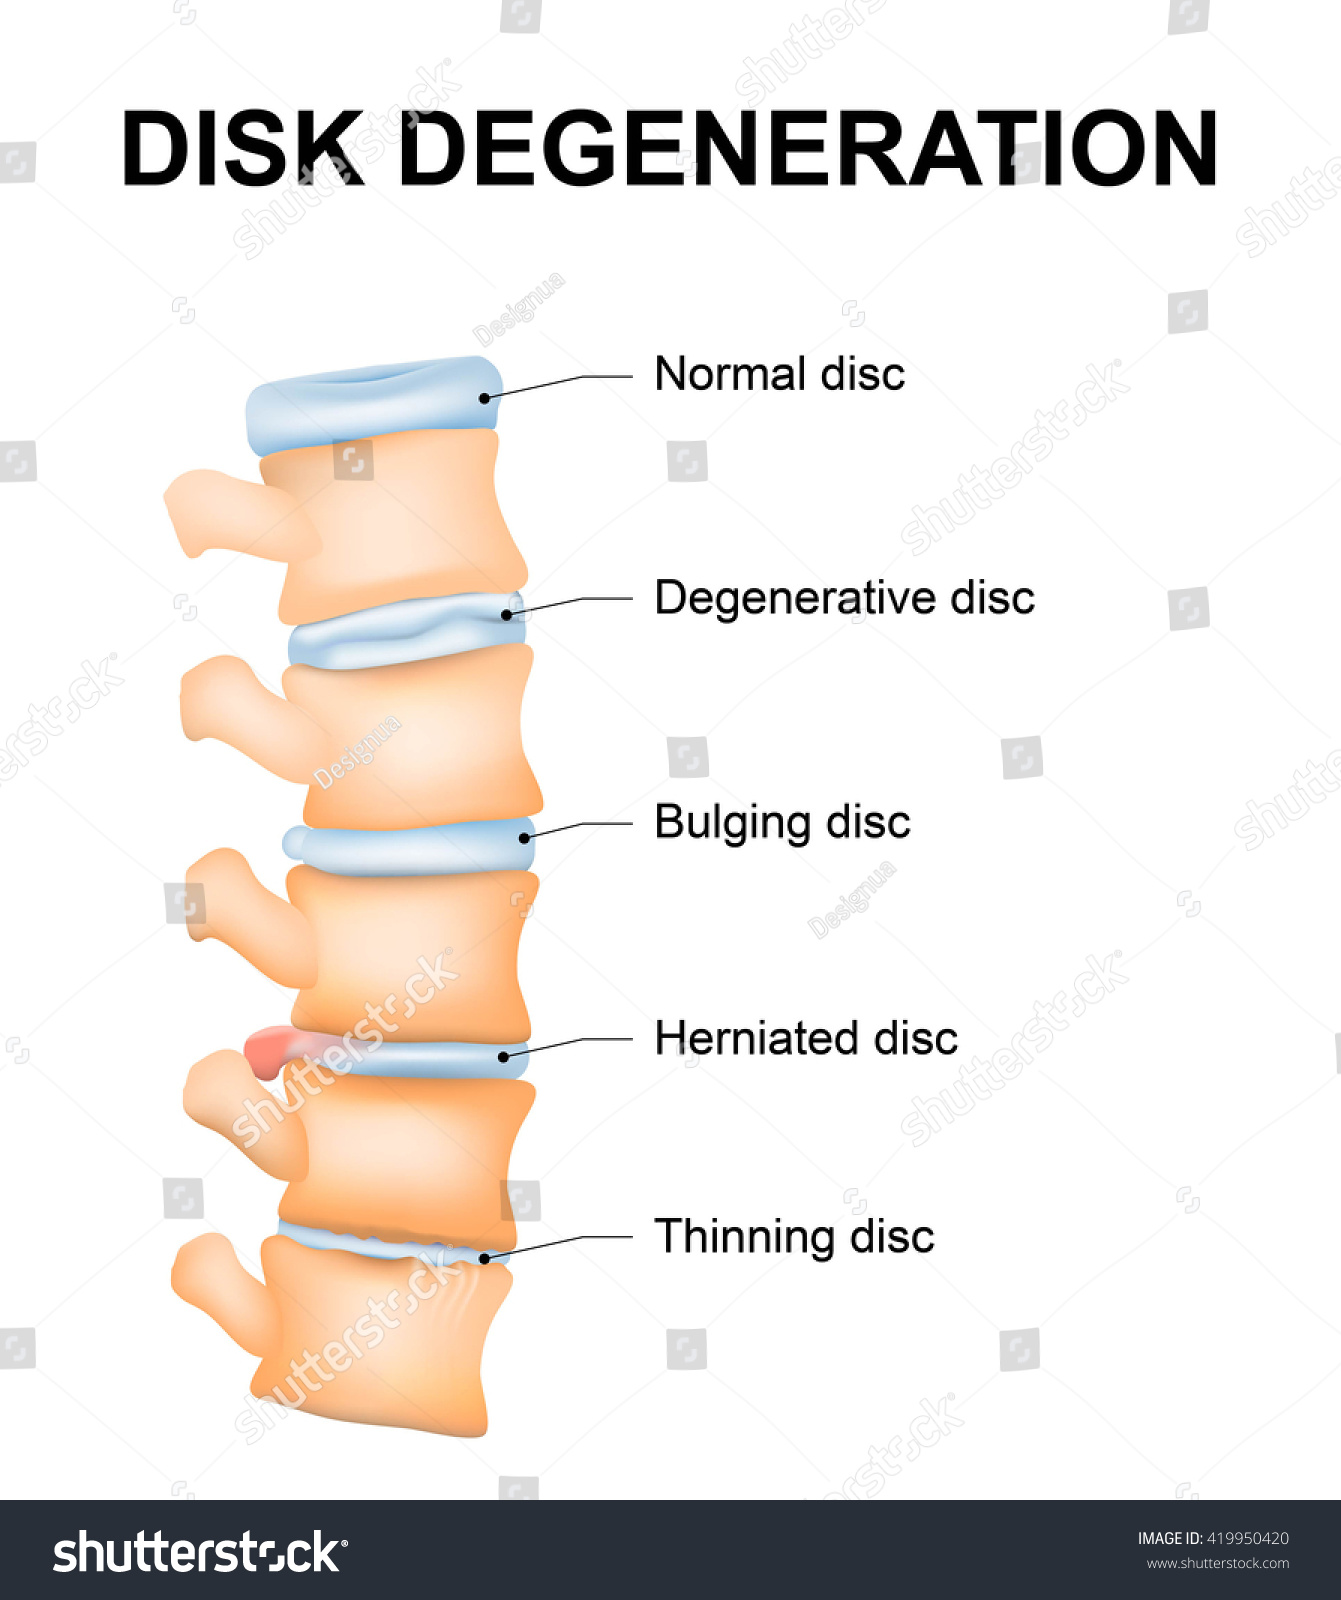 Disc degeneration it's the normal wear and tear - Royalty Free Stock ...